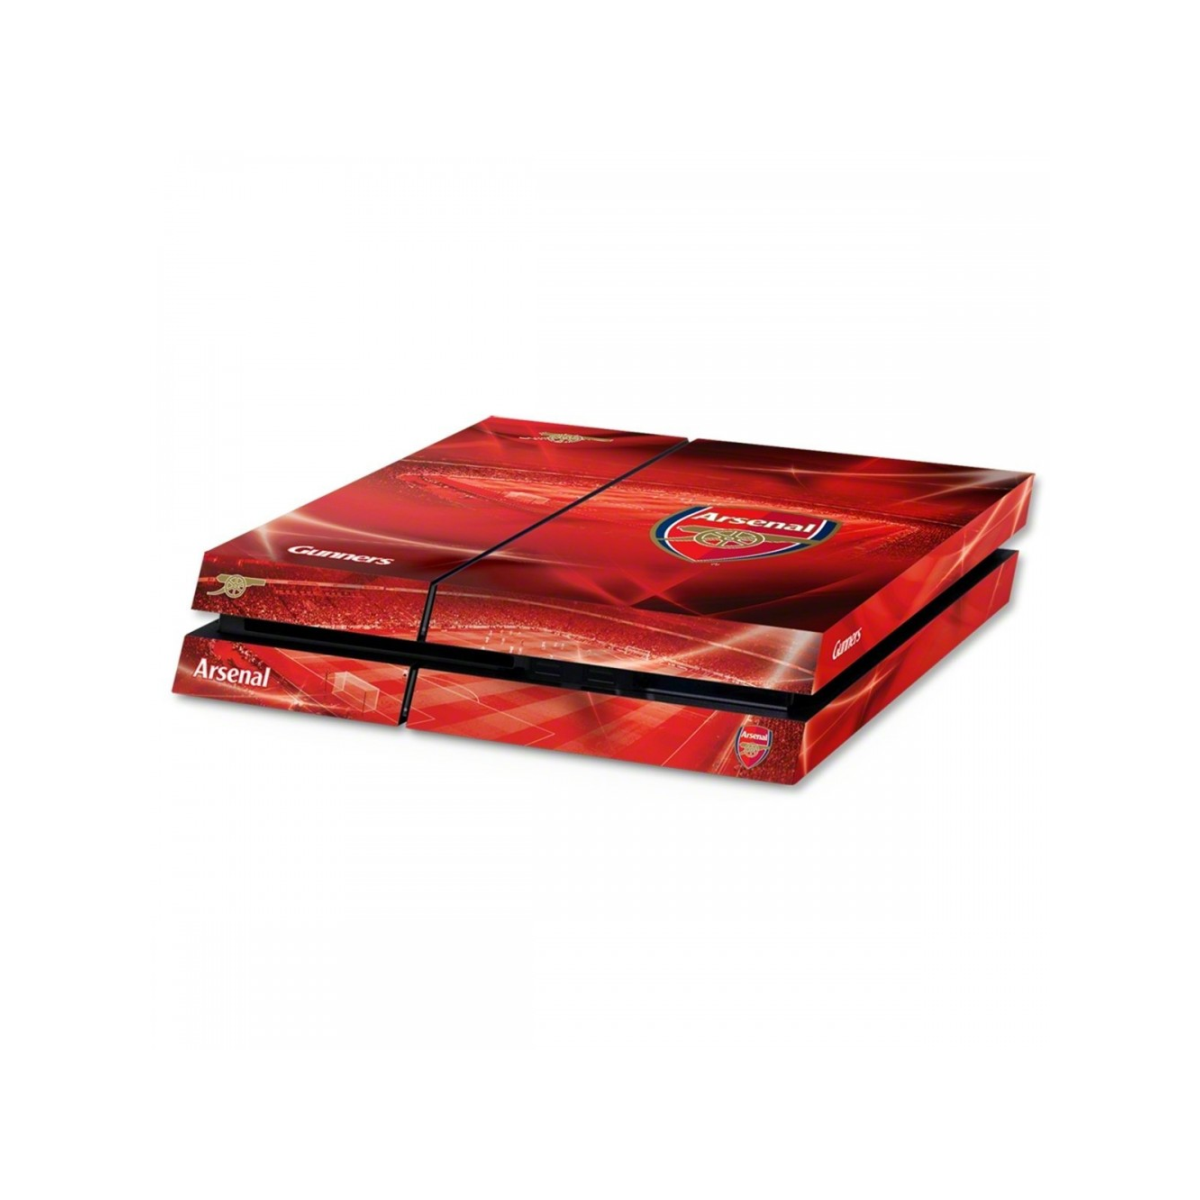 inToro Arsenal FC Skin for PlayStation 4 Console